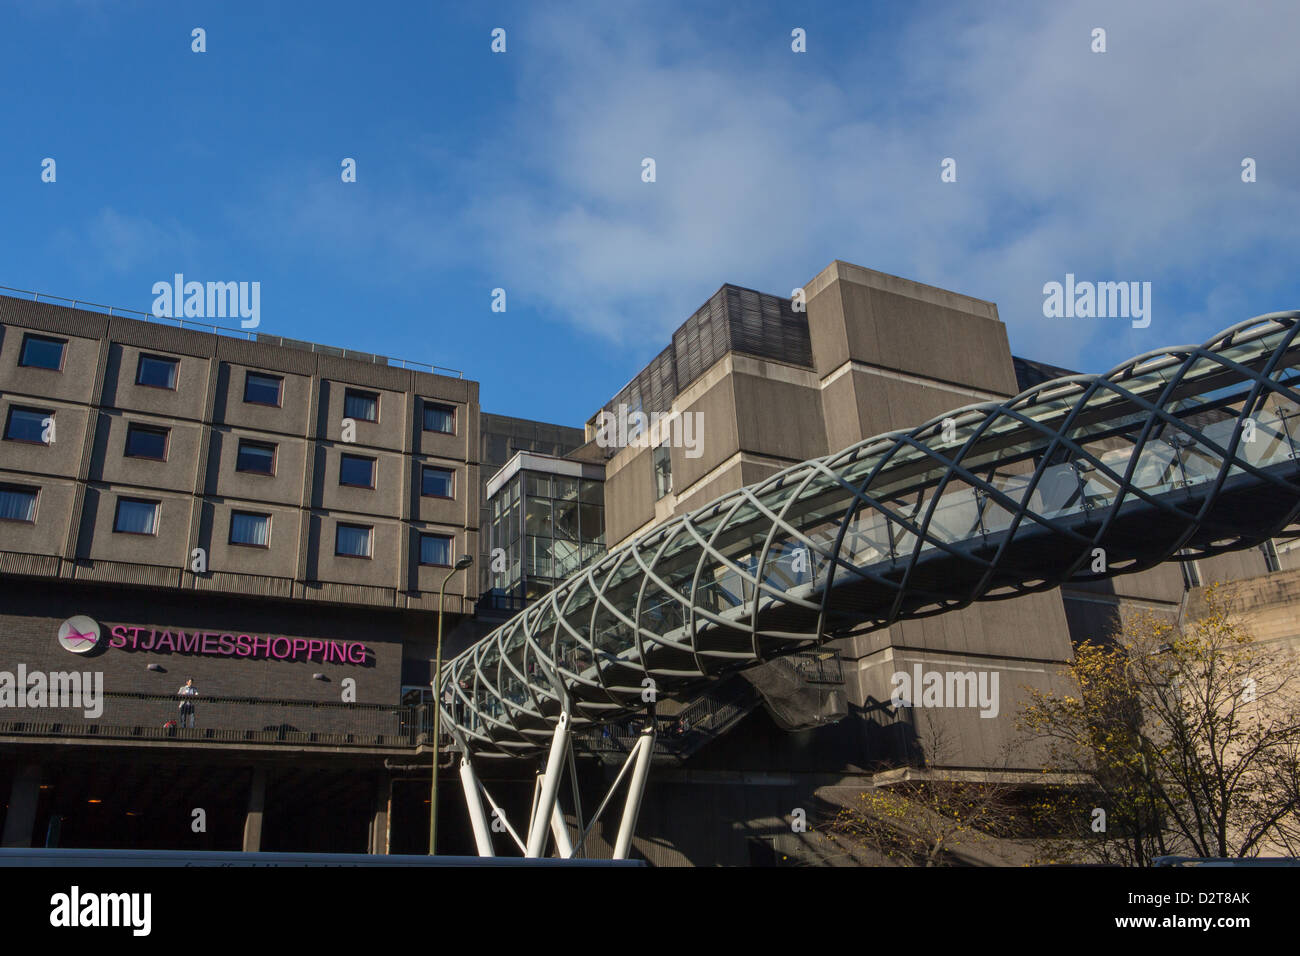 A modern aerial walkway leading to the St. James Shopping Centre in Edinburgh, Scotland. Stock Photo